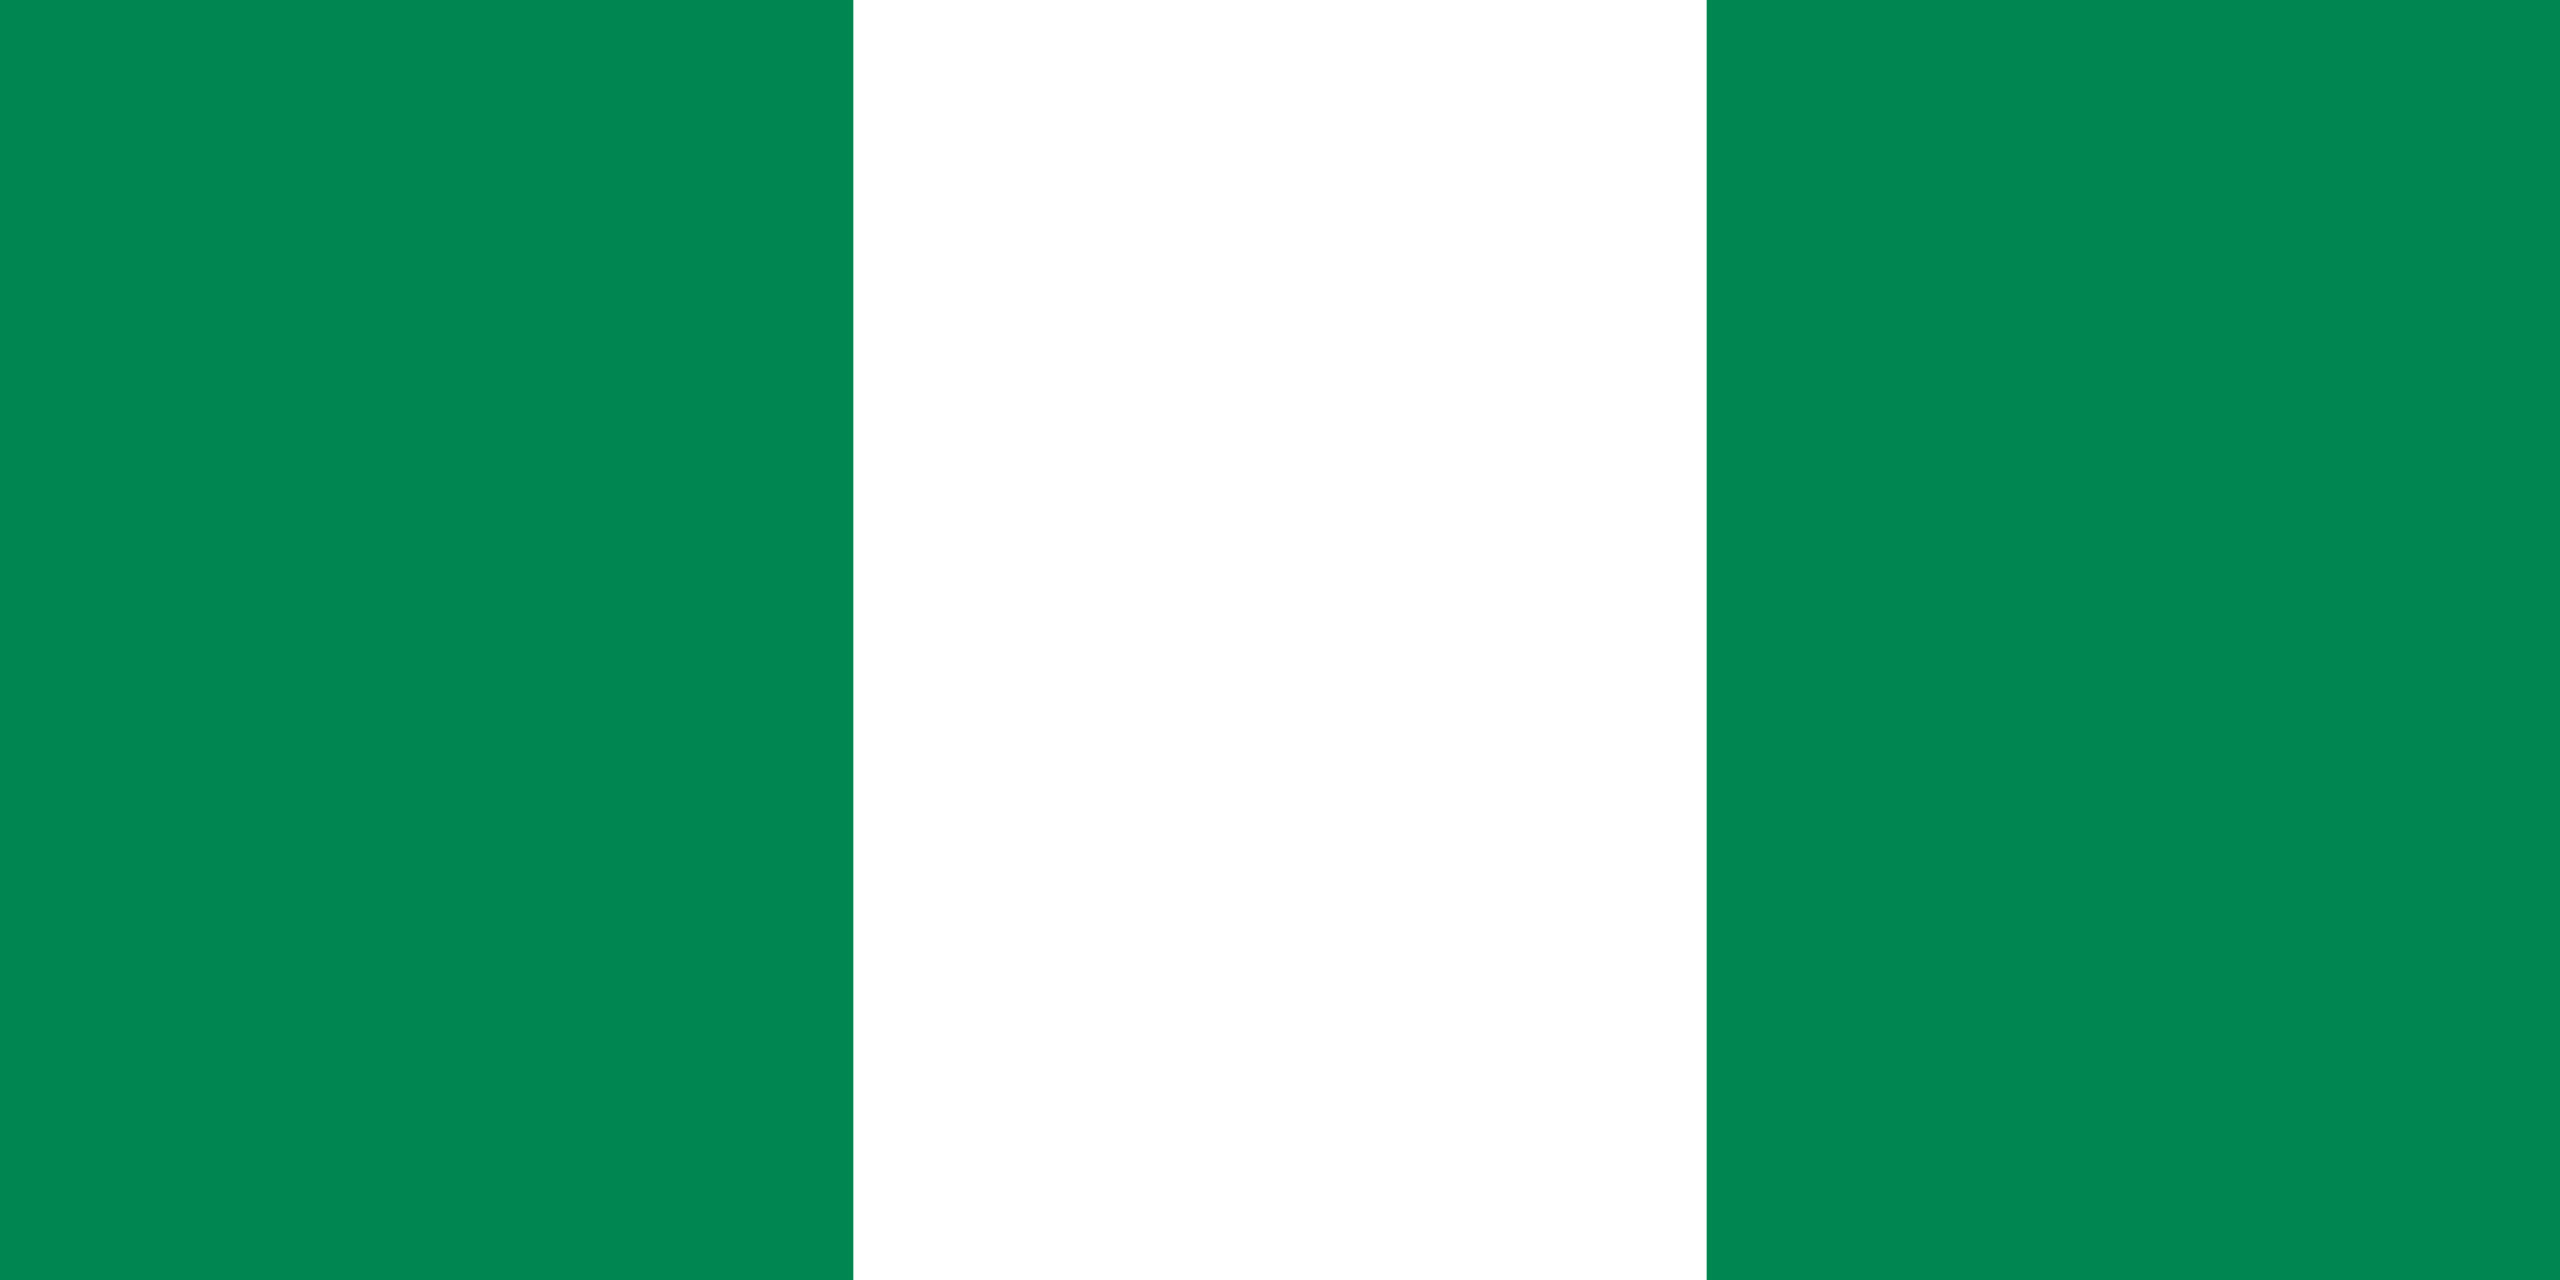 File:Flag of Nigeria.svg - Wikimedia Commons